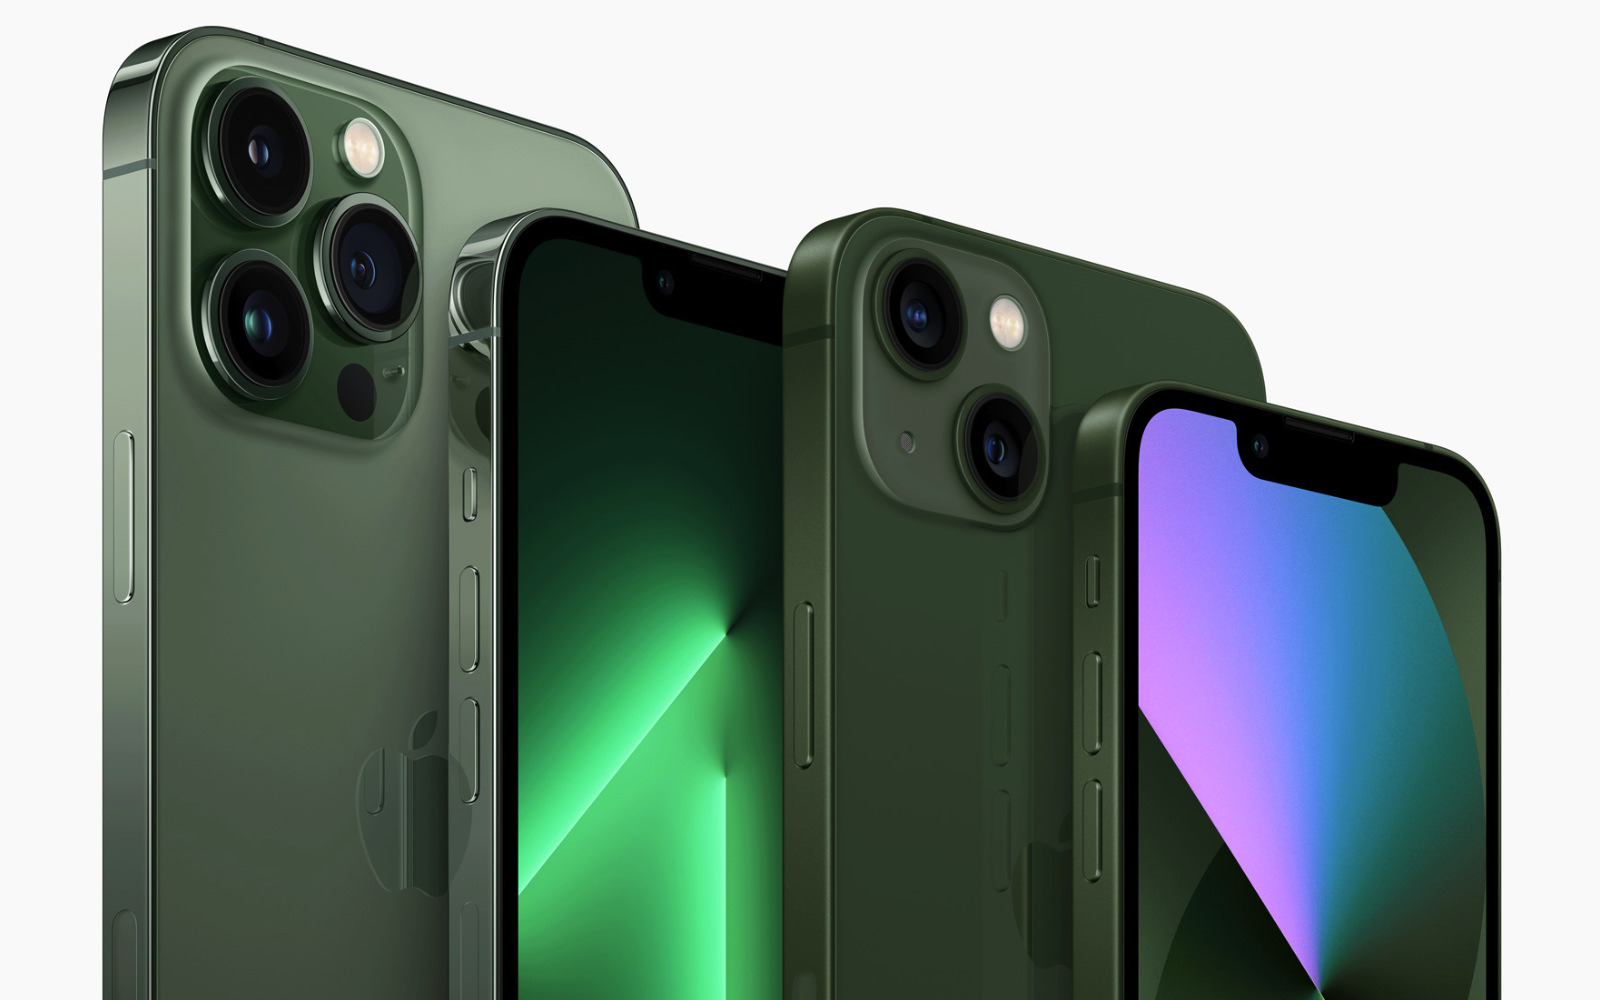 New Green Colors for iPhone13 Series